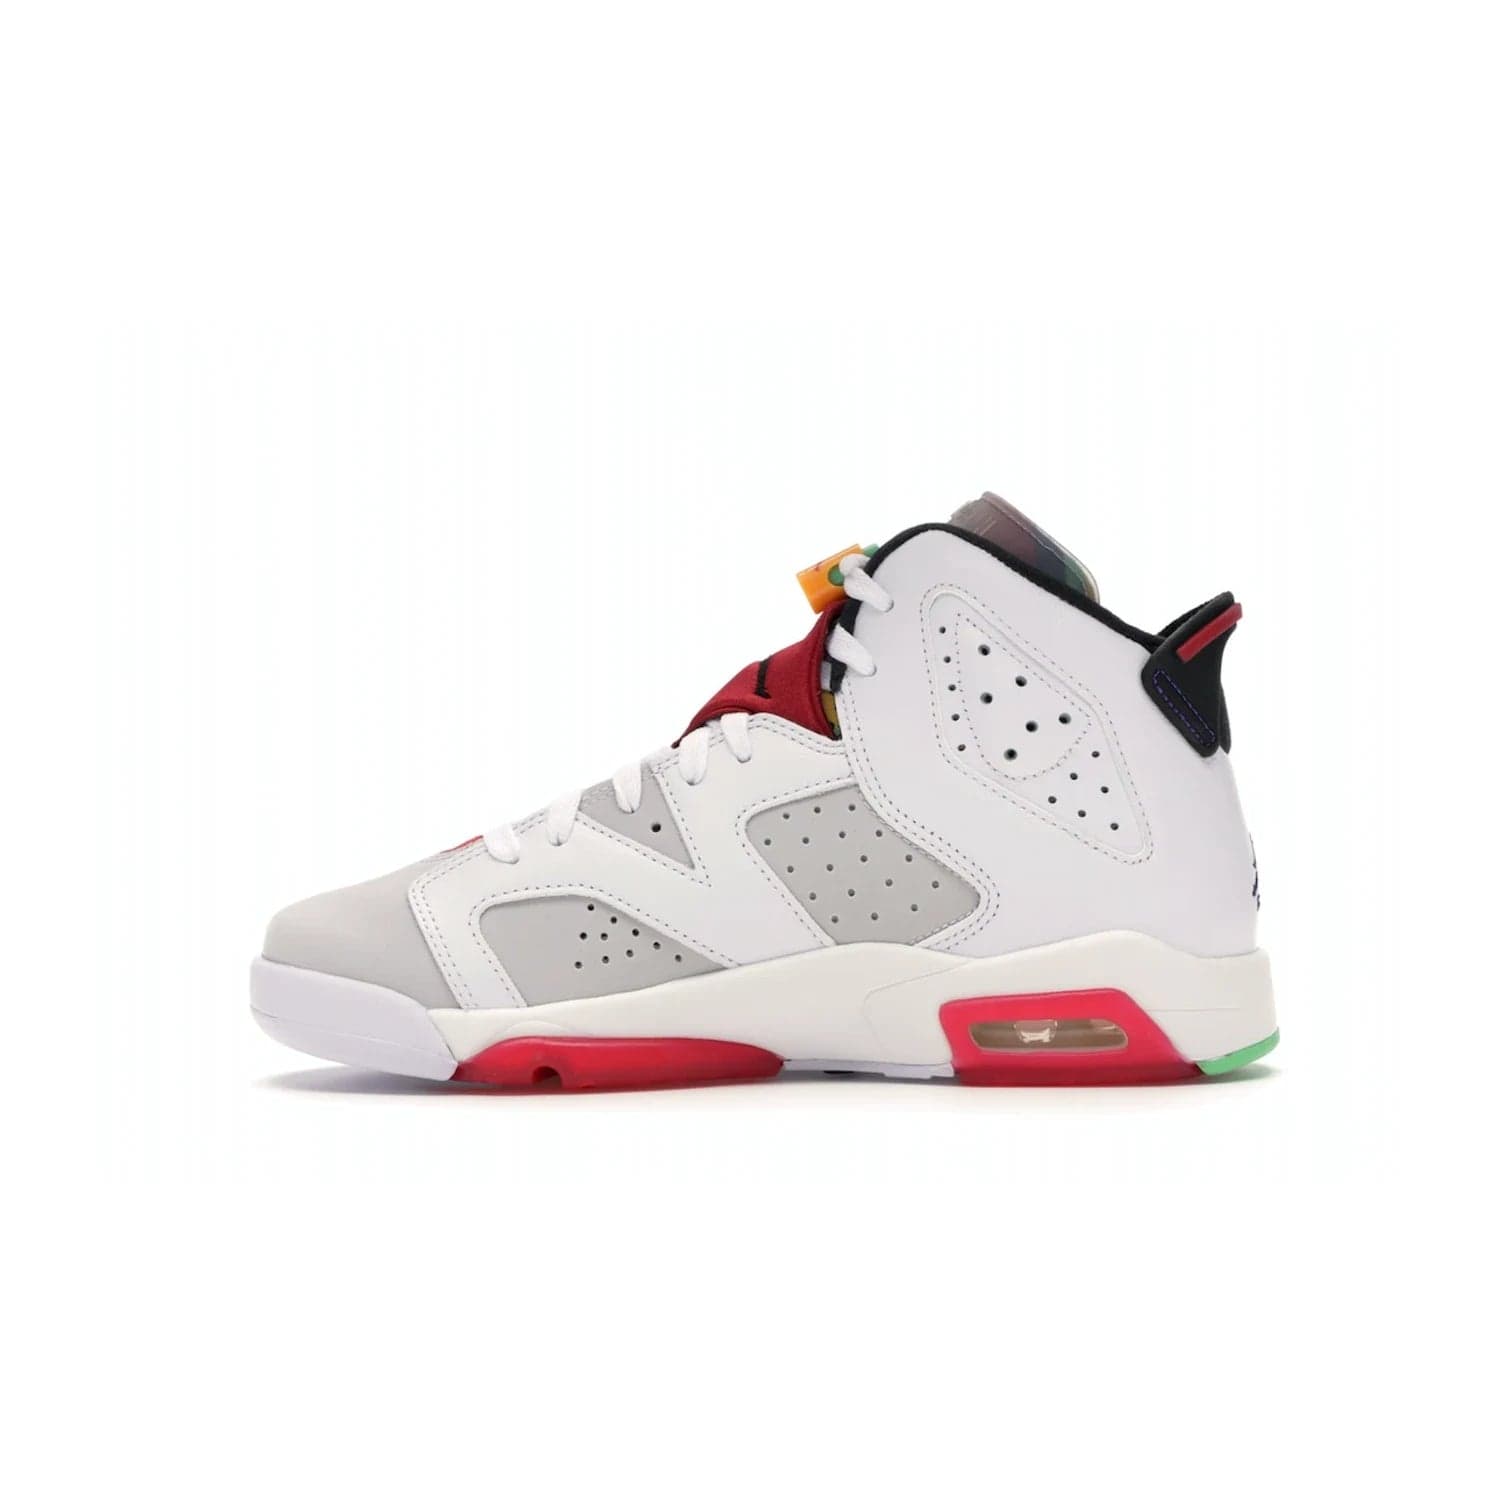 Jordan 6 Retro Hare (GS) - Image 19 - Only at www.BallersClubKickz.com - The Air Jordan 6 Hare GS. Comfortable suede upper, perforations, red pods, two-tone midsole, and signature "Jumpman" emblem. Released 17 June 2020. Perfect for any sneakerhead.